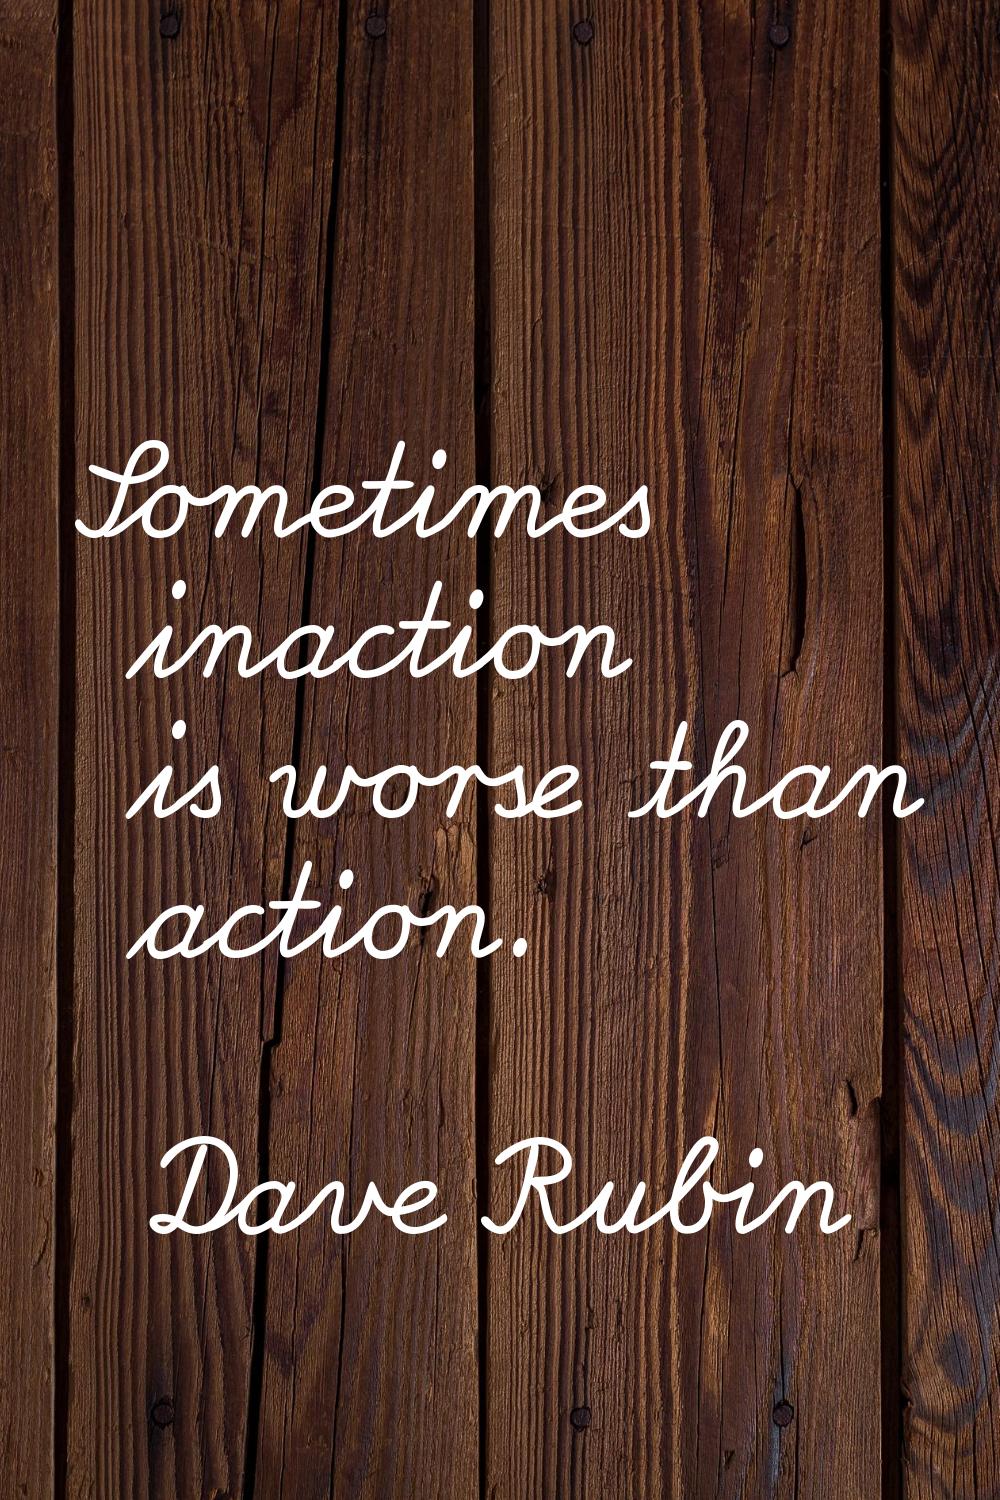 Sometimes inaction is worse than action.